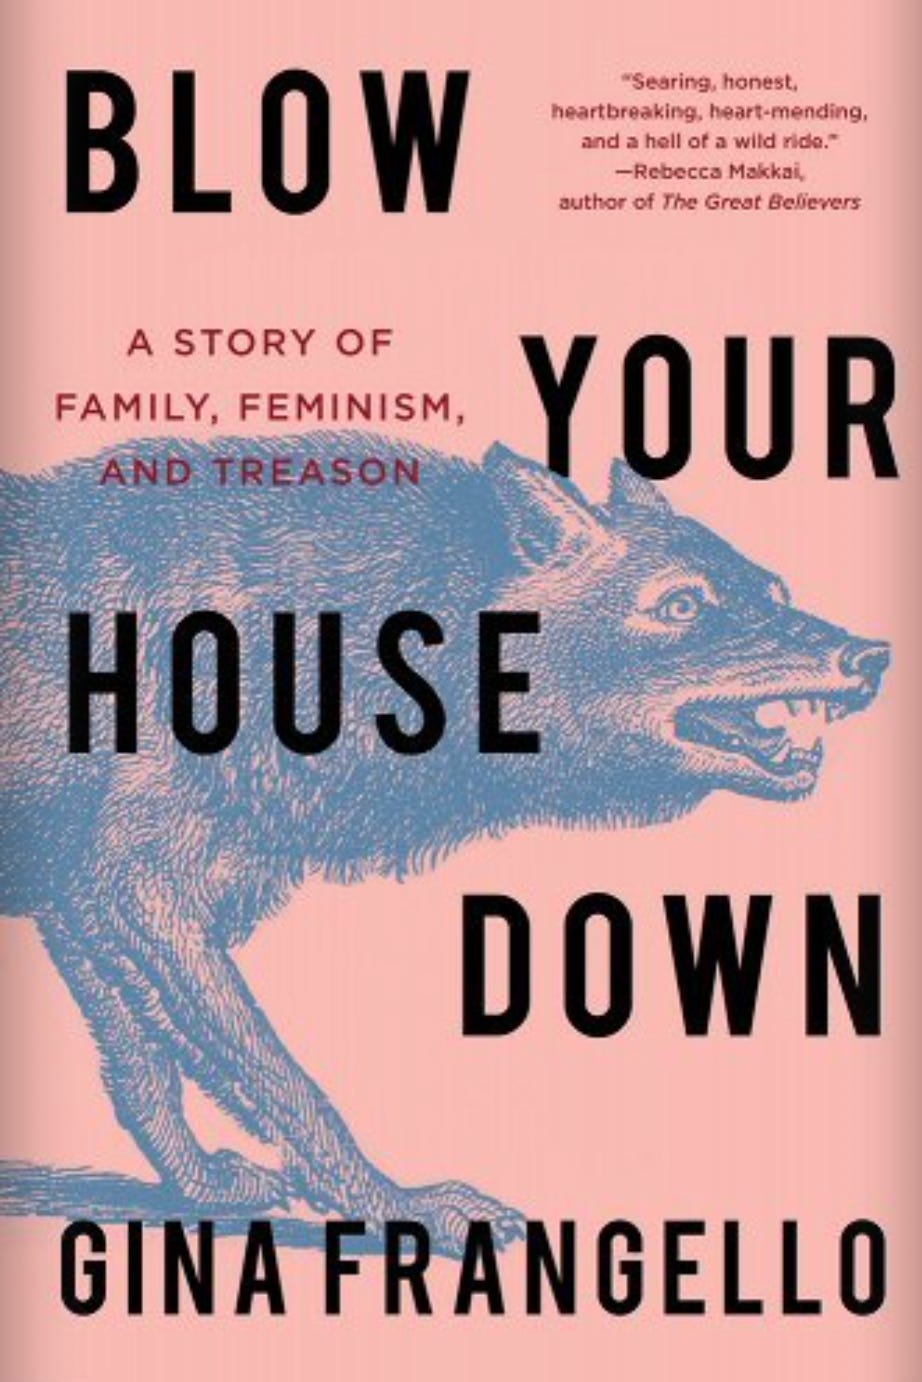 Book cover of Blow Your House Down by Gina Frangello. Background is pink with a line drawing of a wolf with sharp teeth bared in light blue ink.